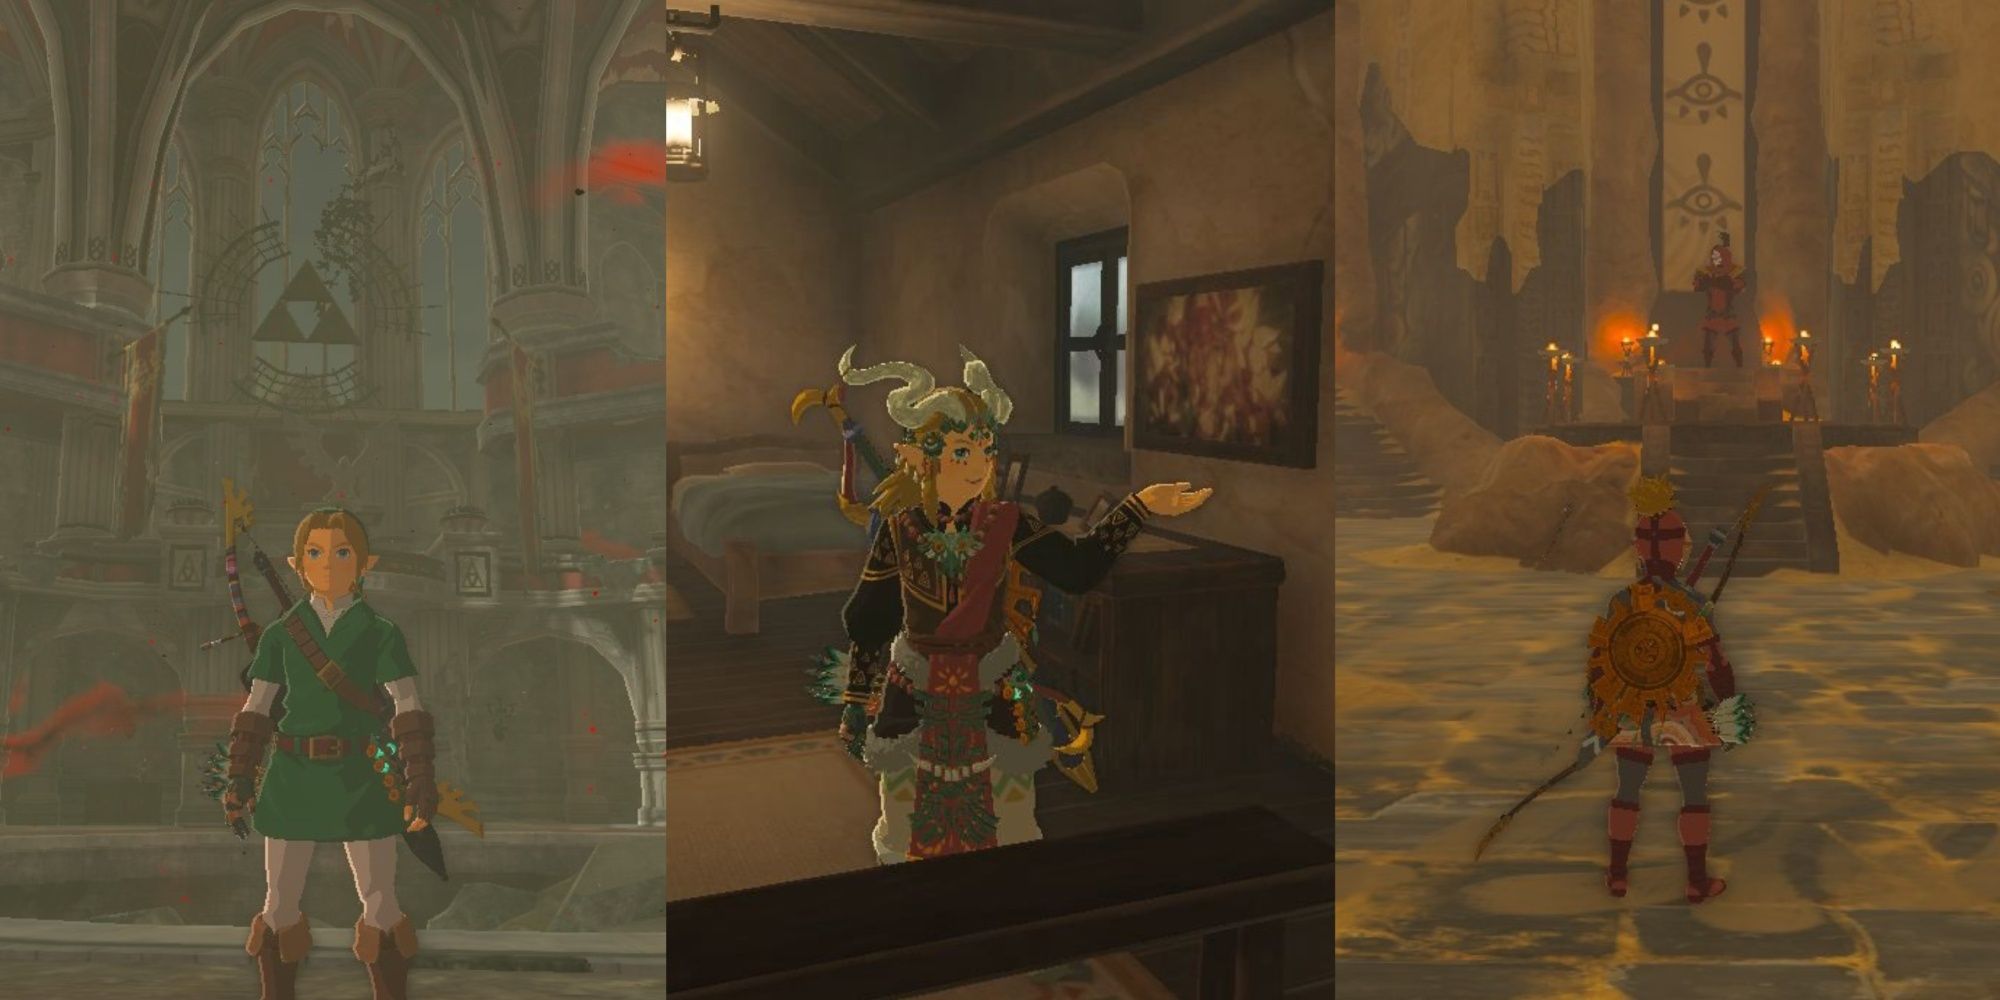 Split image of Link in the Hyrule Castle Sanctum, Link in his house in Hateno Village next to the Champions photo, and Link in the Yiga Clan disguise in the Yiga Clan Hideout in The Legend of Zelda Tears of the Kingdom.